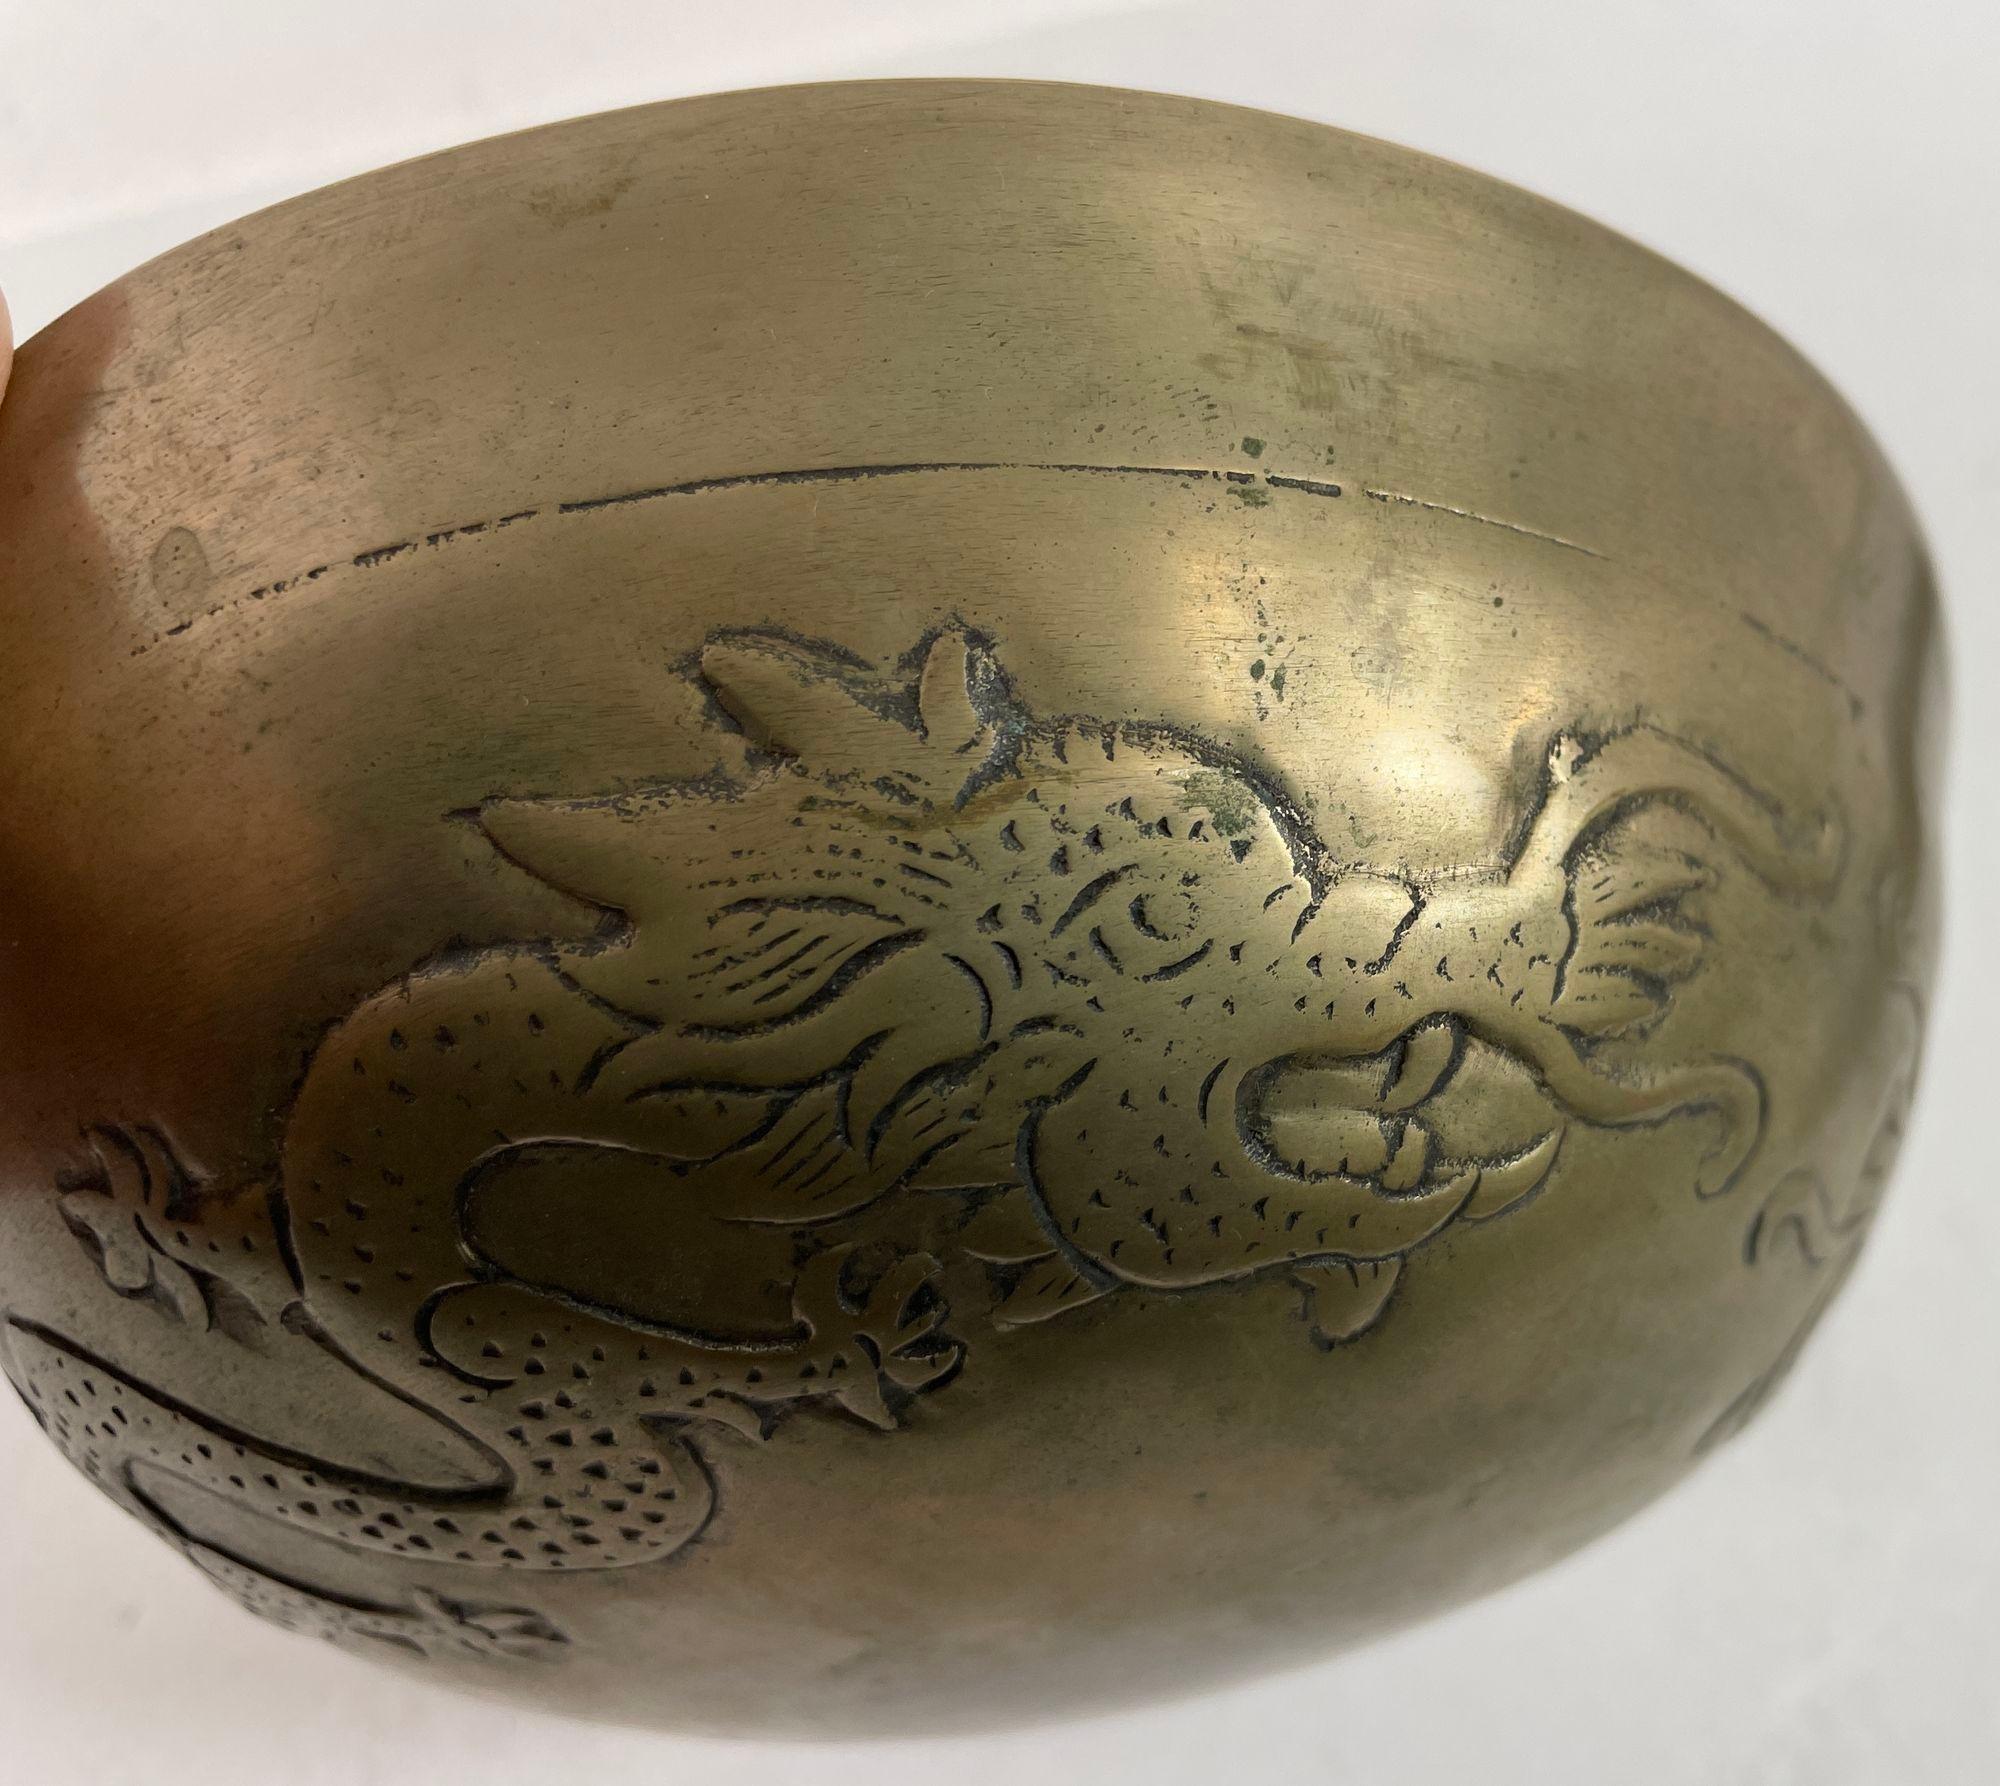 Hammered Brass Singing Bowl with Dragons Nepal 1940s For Sale 4